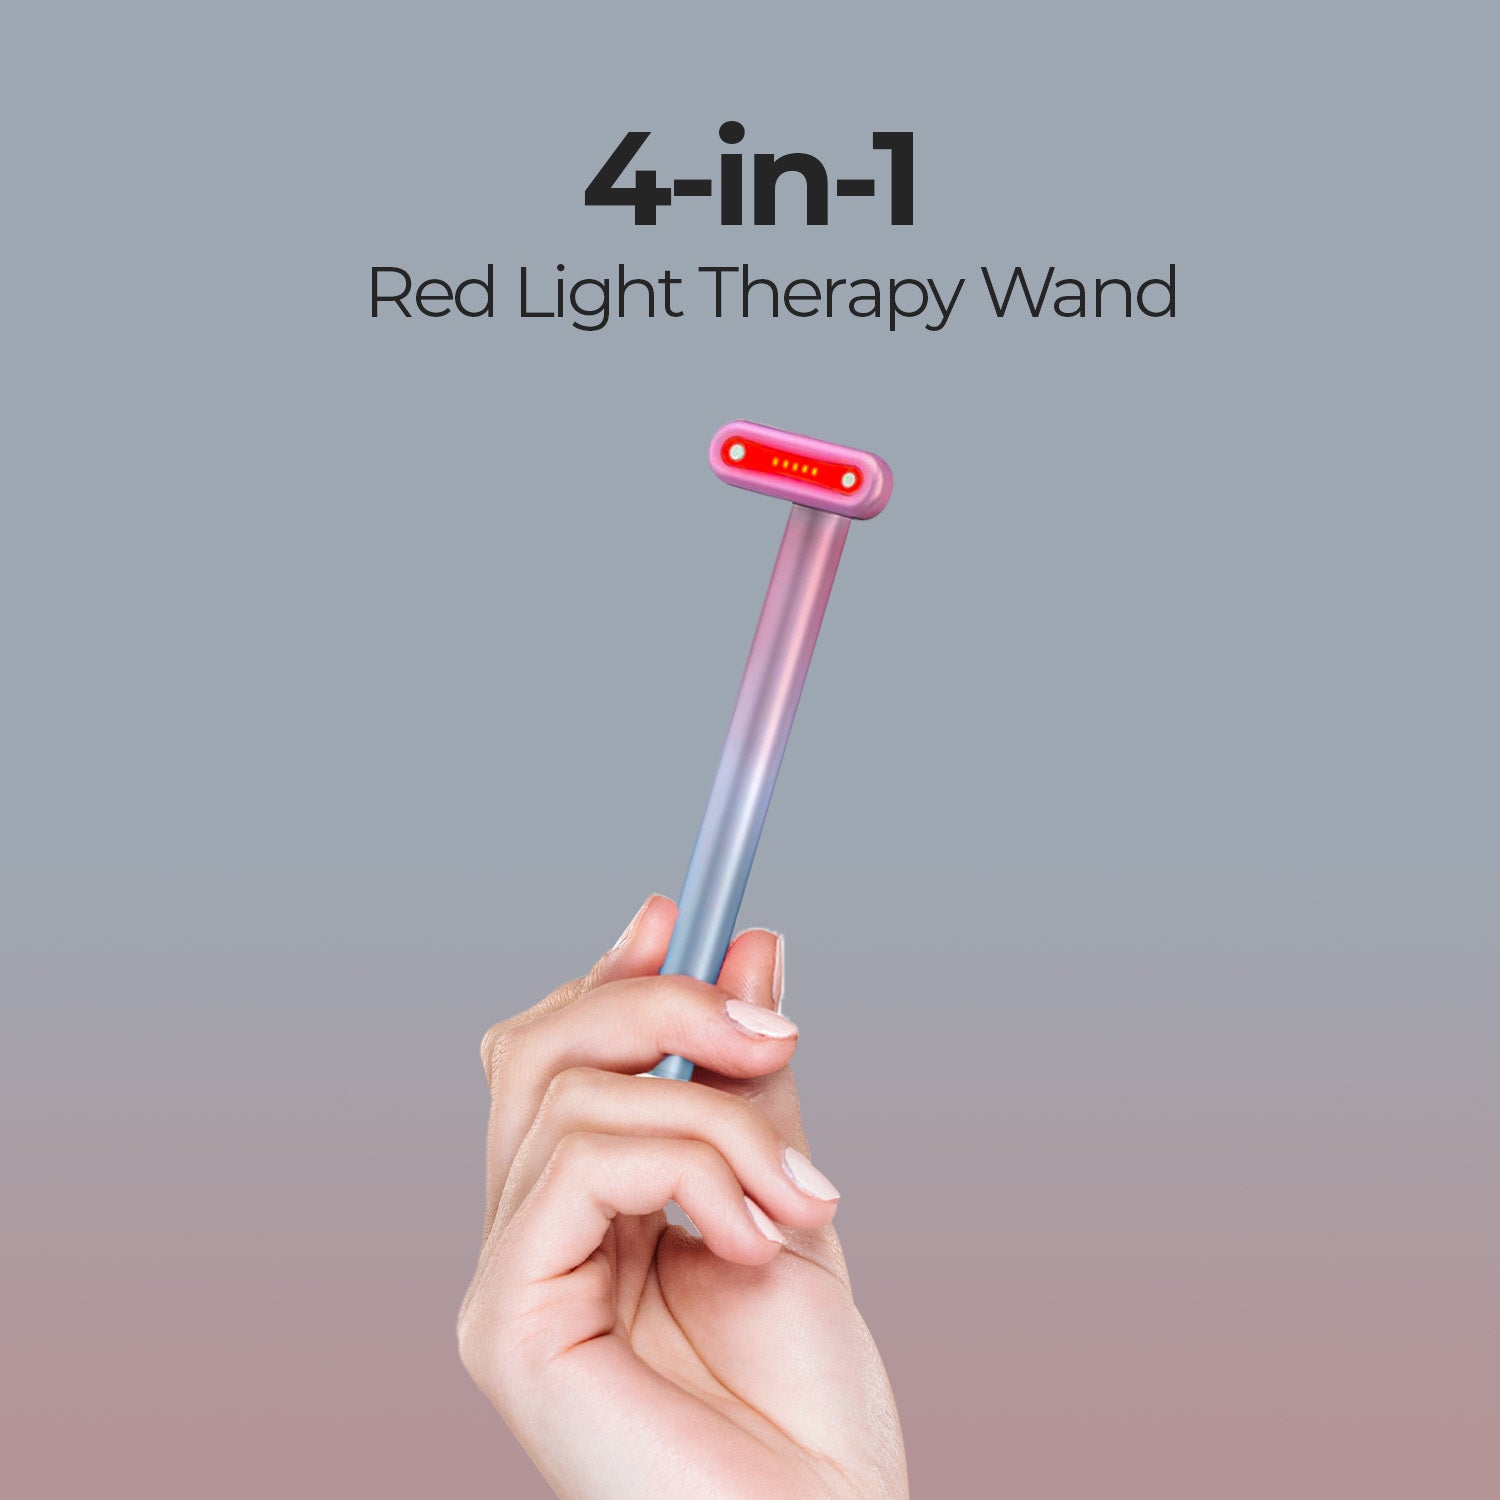 4-in-1 Red Light Therapy Wand - Beaullex